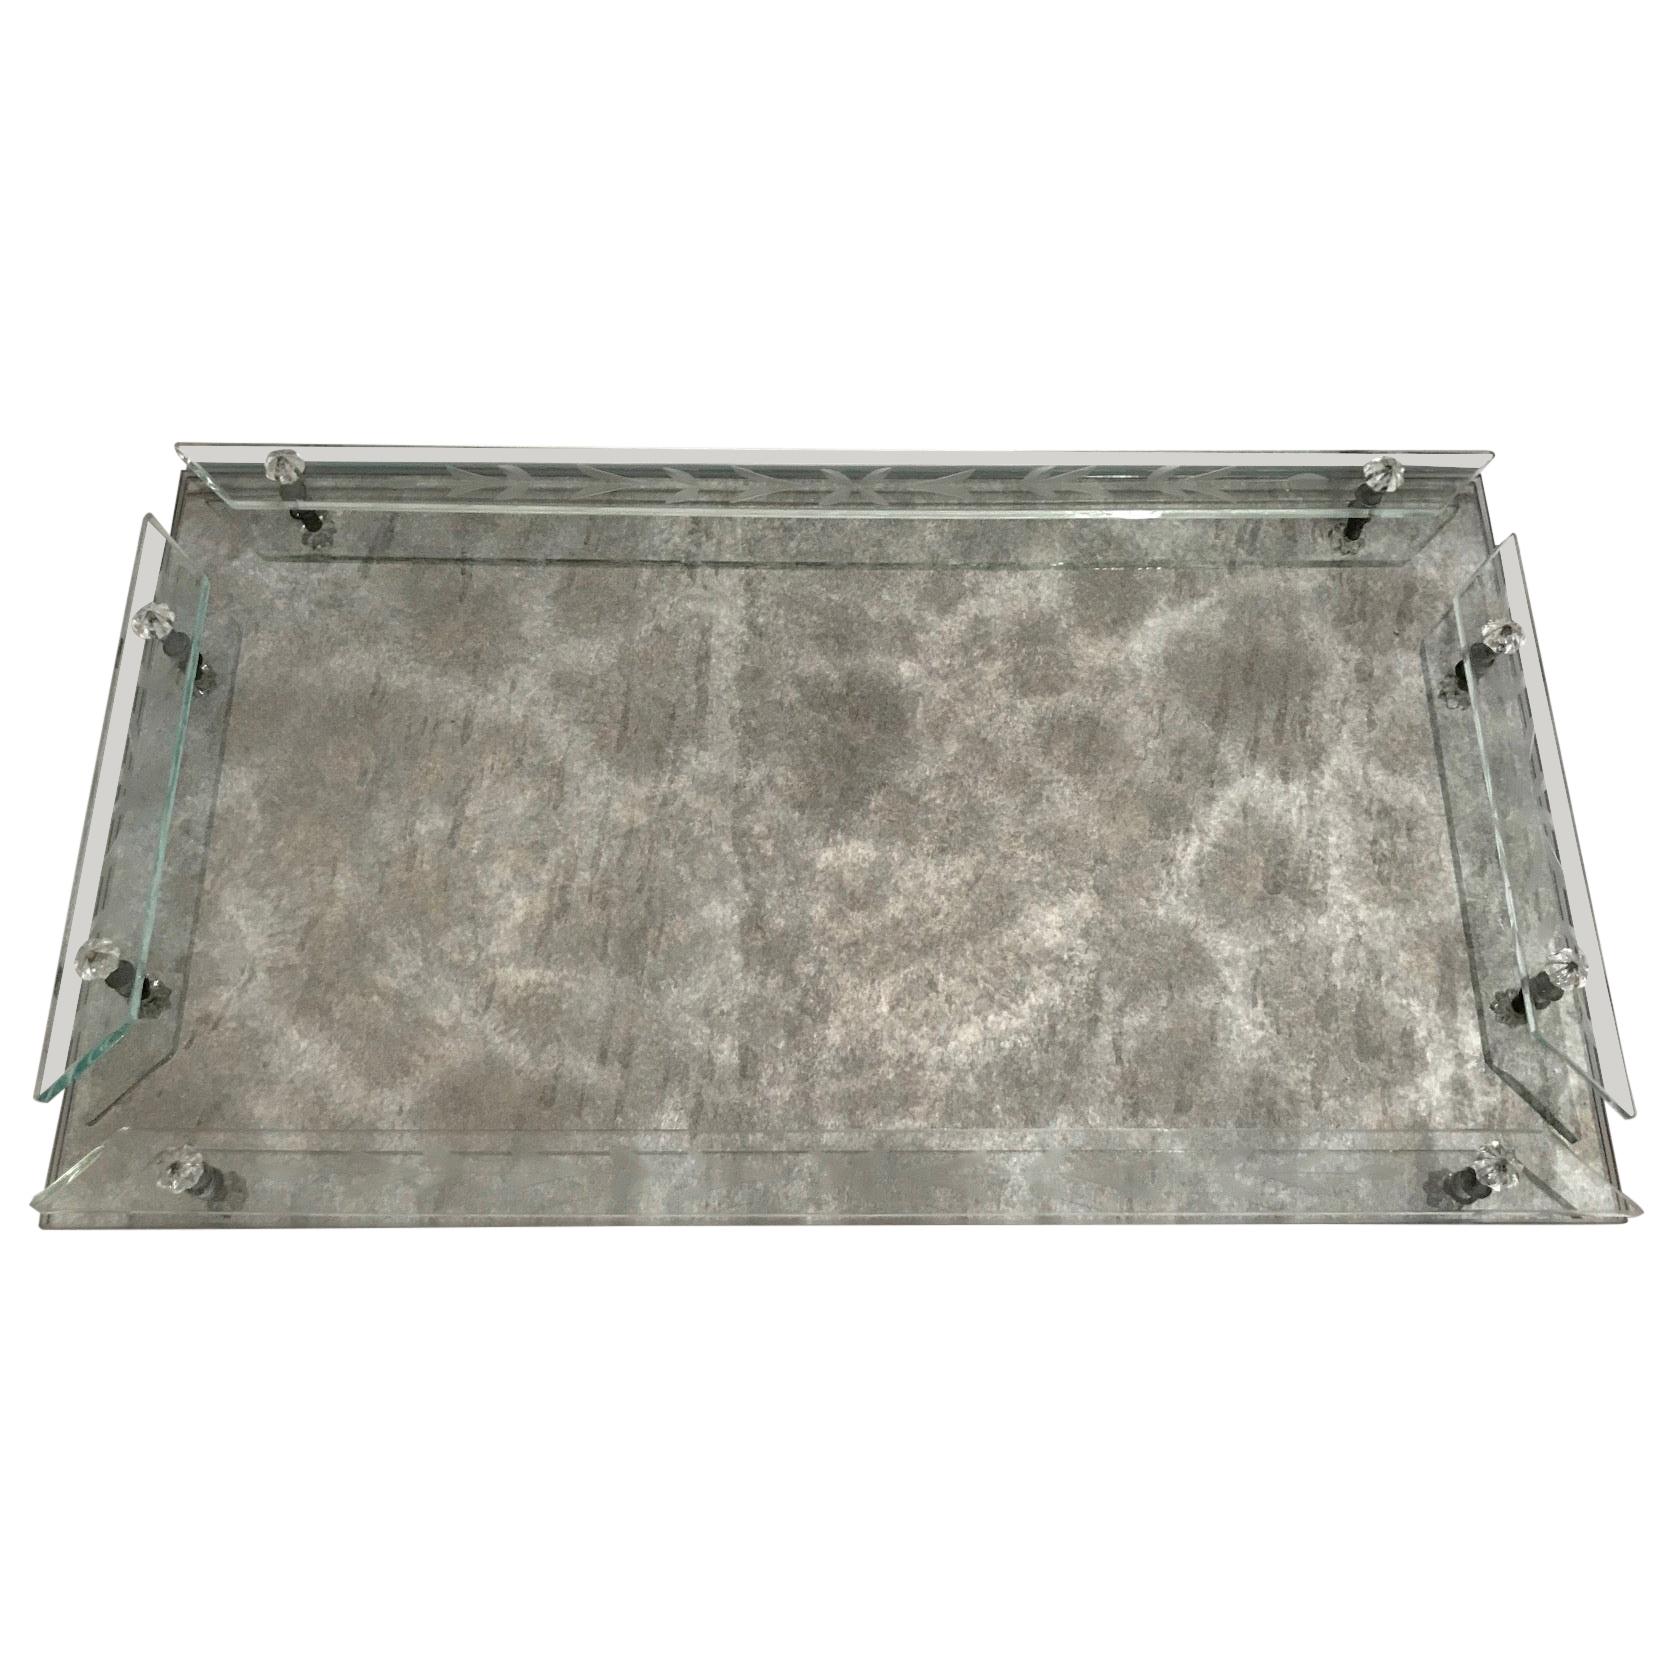 Hollywood Regency and Art Deco era Venetian mirrored tray with smokey grey antique cast and veining. The vanity tray is fitted with art glass gallery rails featuring elegant hand etched floral designs, and features glass rosette accents. Perfect for